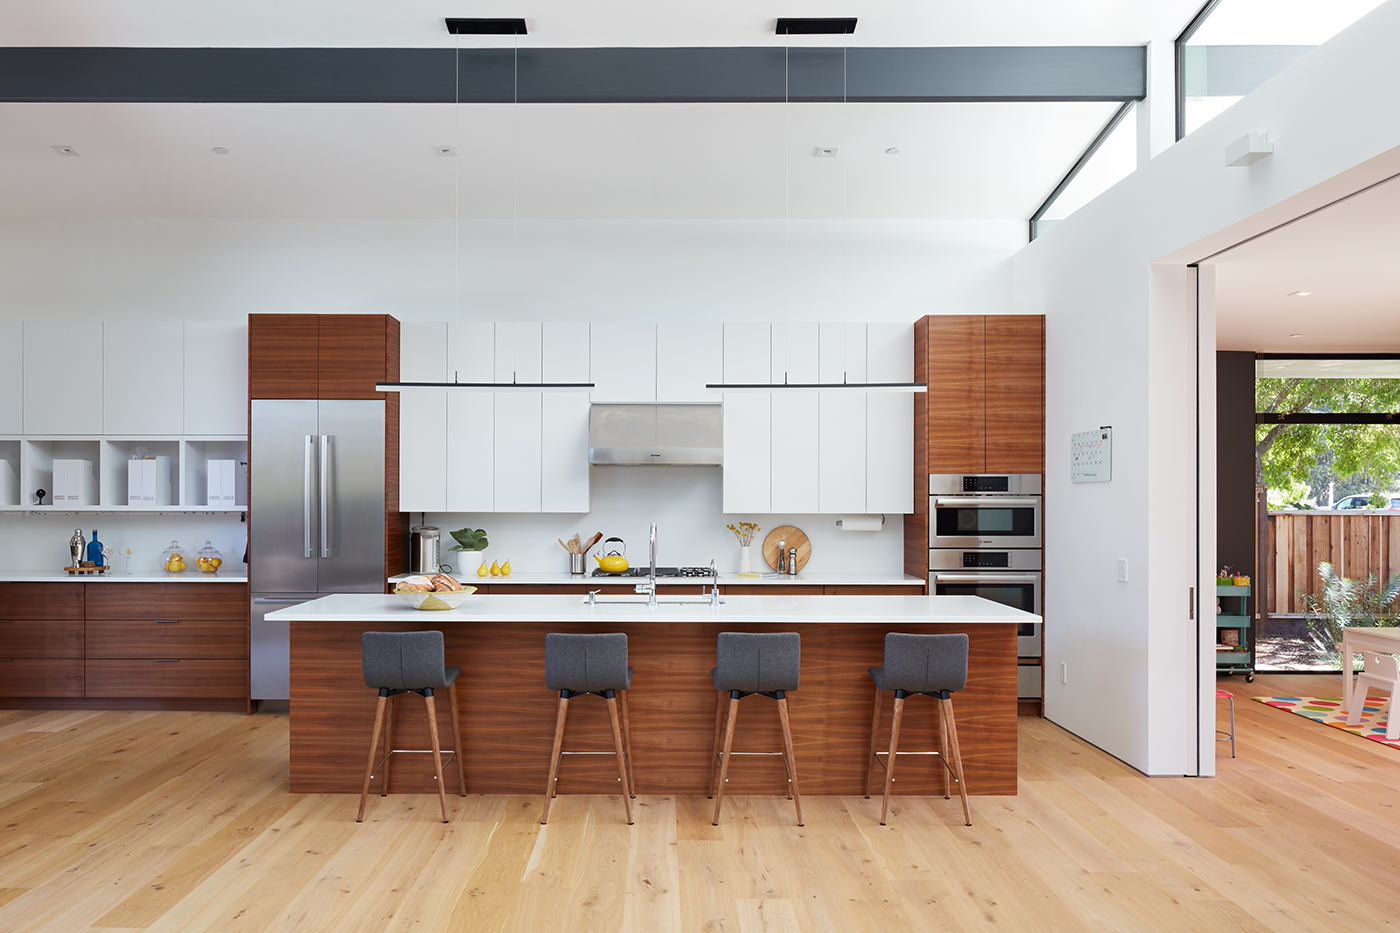 huge kitchen island with single large sink in the middle, directly across from a symmetrical cooktop in the wall cabinetry.